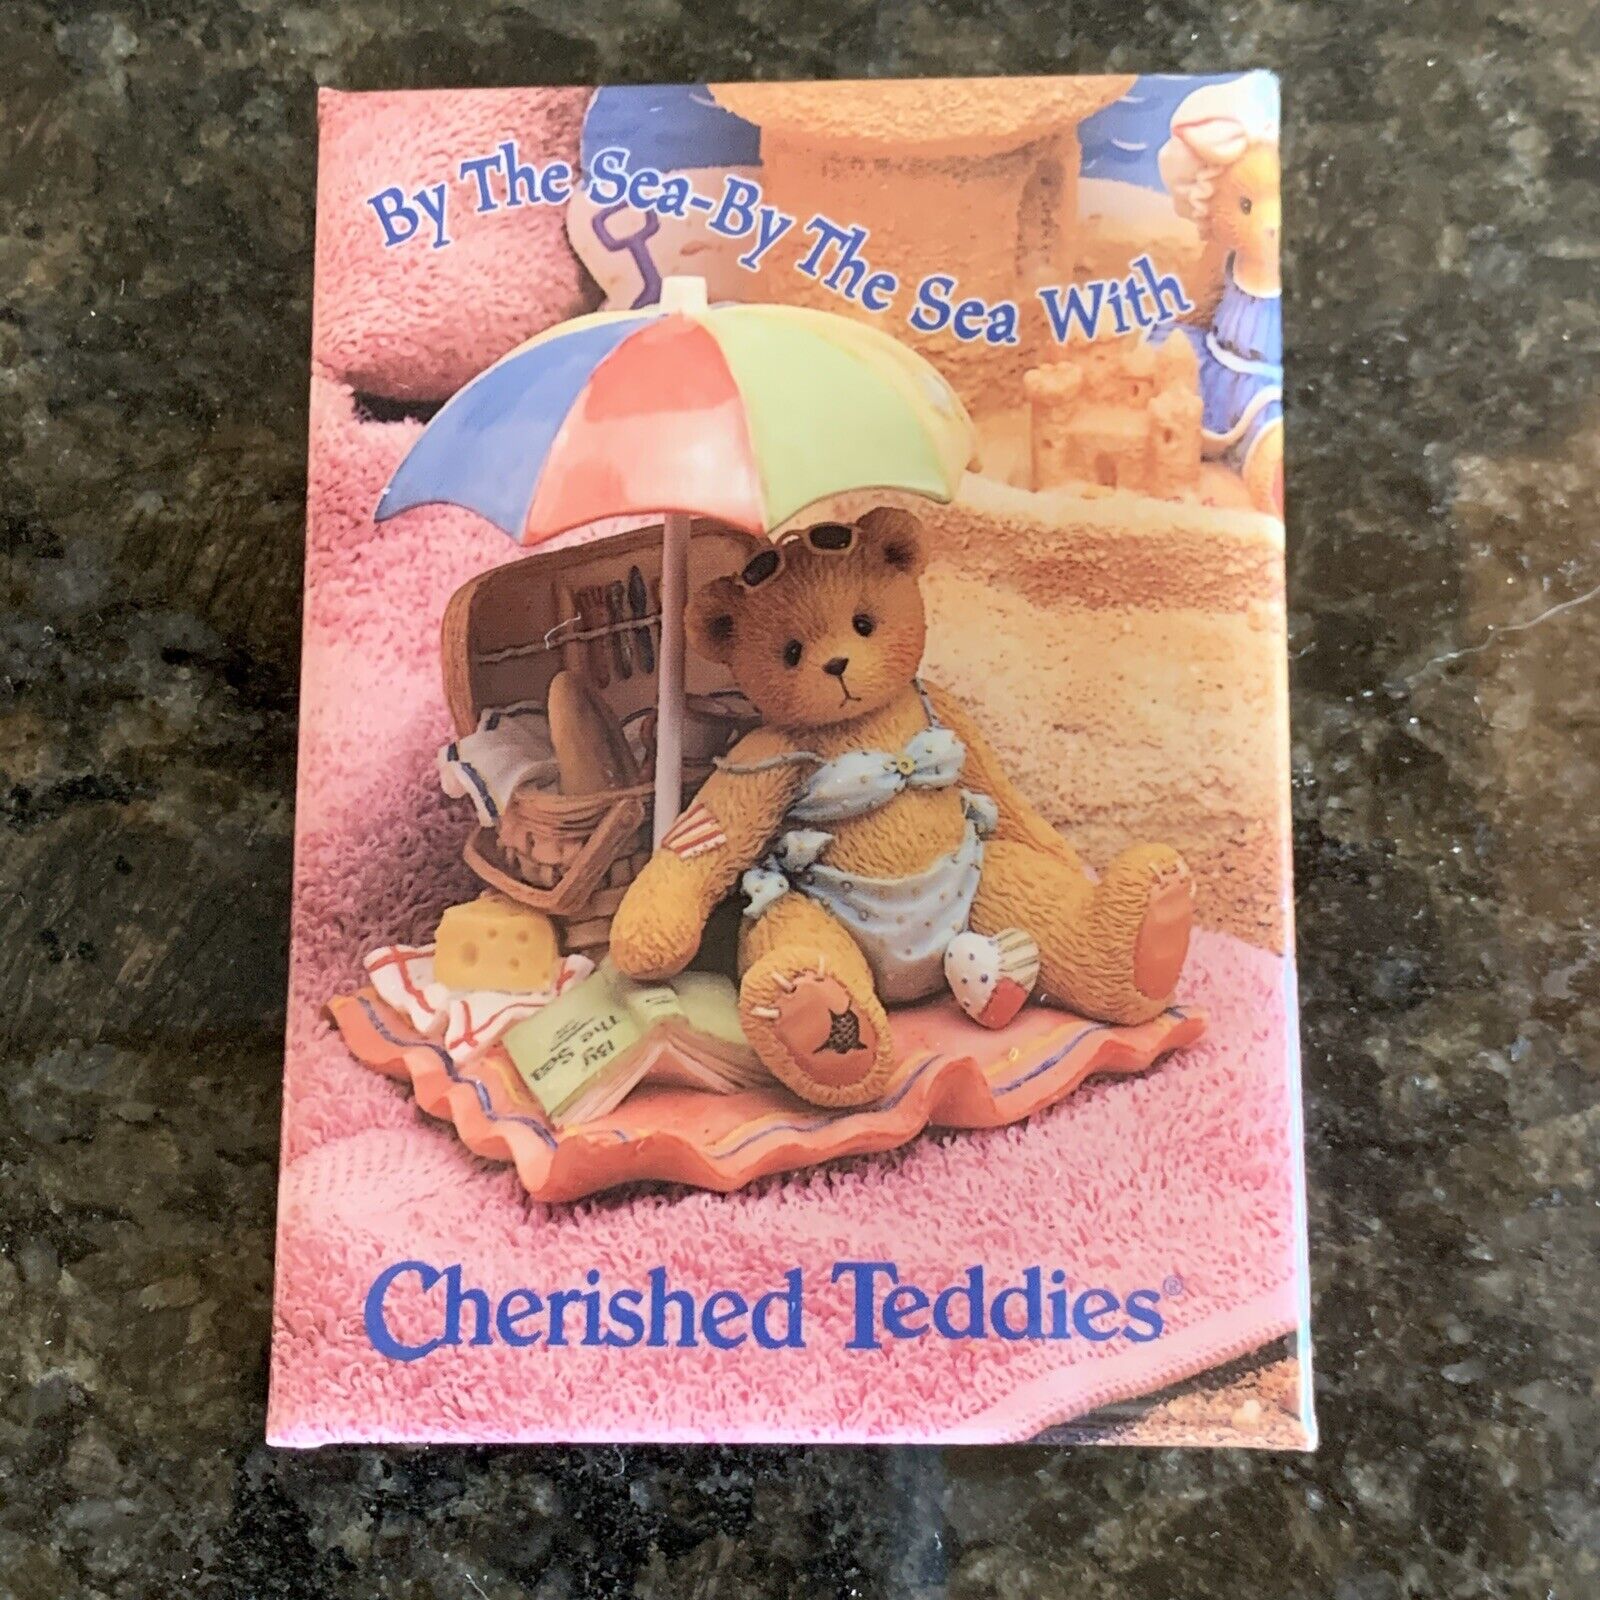 Vintage ENESCO Cherished Teddies By The Sea Large Promo Button Pinback Pin